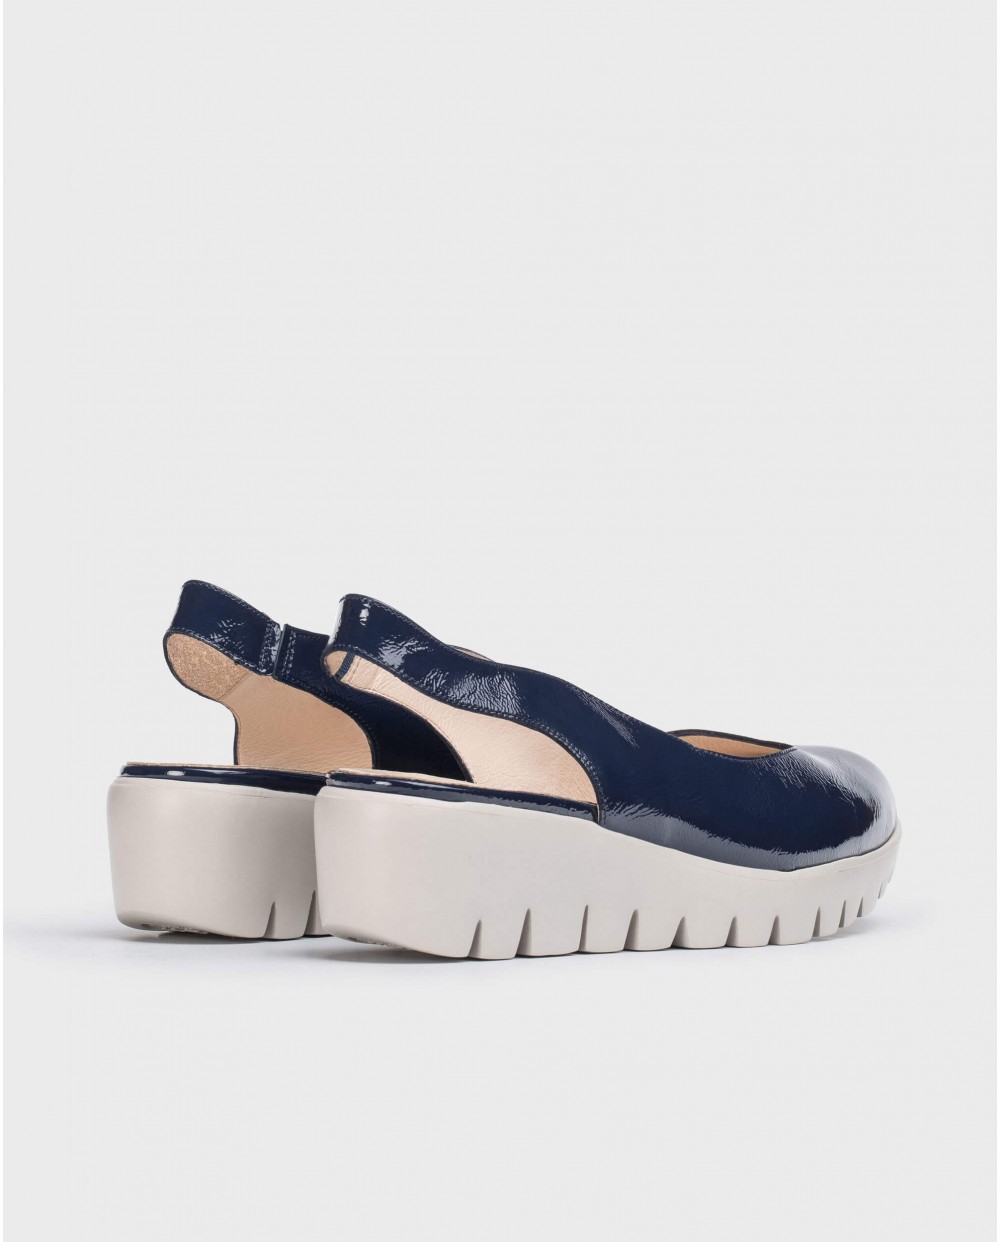 Wonders-Wedges-shoe with an asymmetric throat